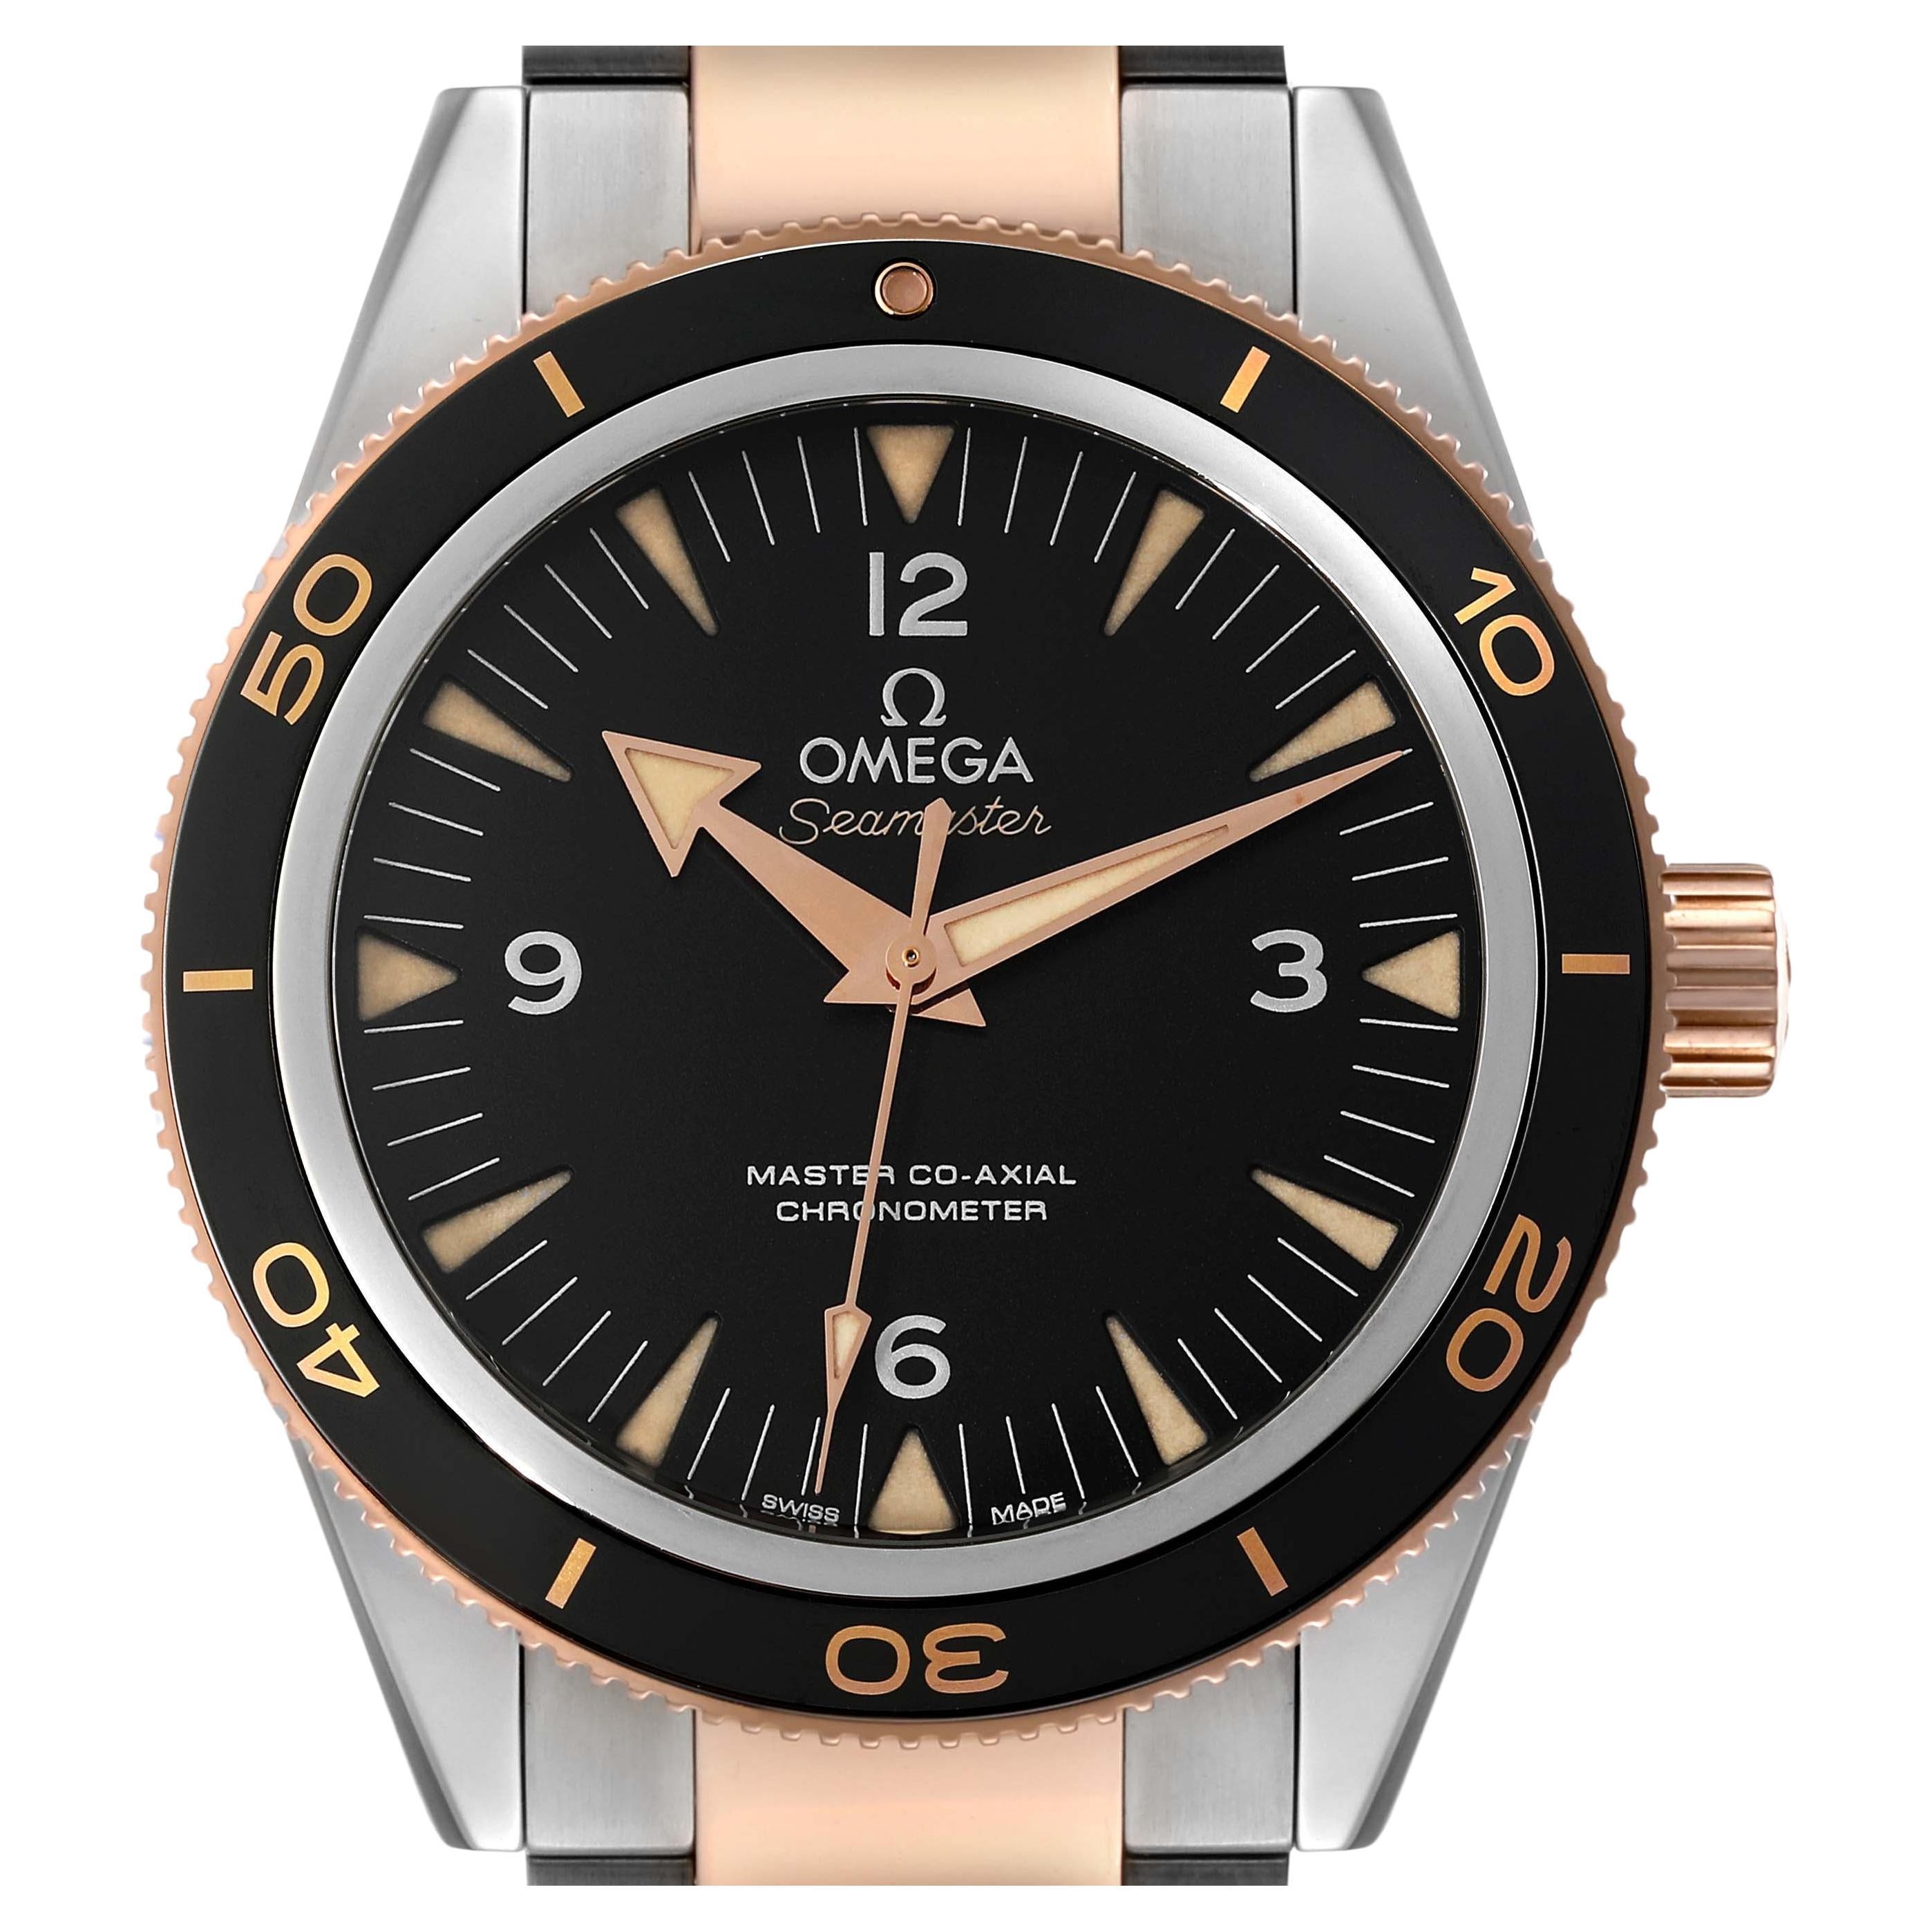 Omega Seamaster 300M Co-Axial Steel Rose Gold Watch 233.20.41.21.01.001